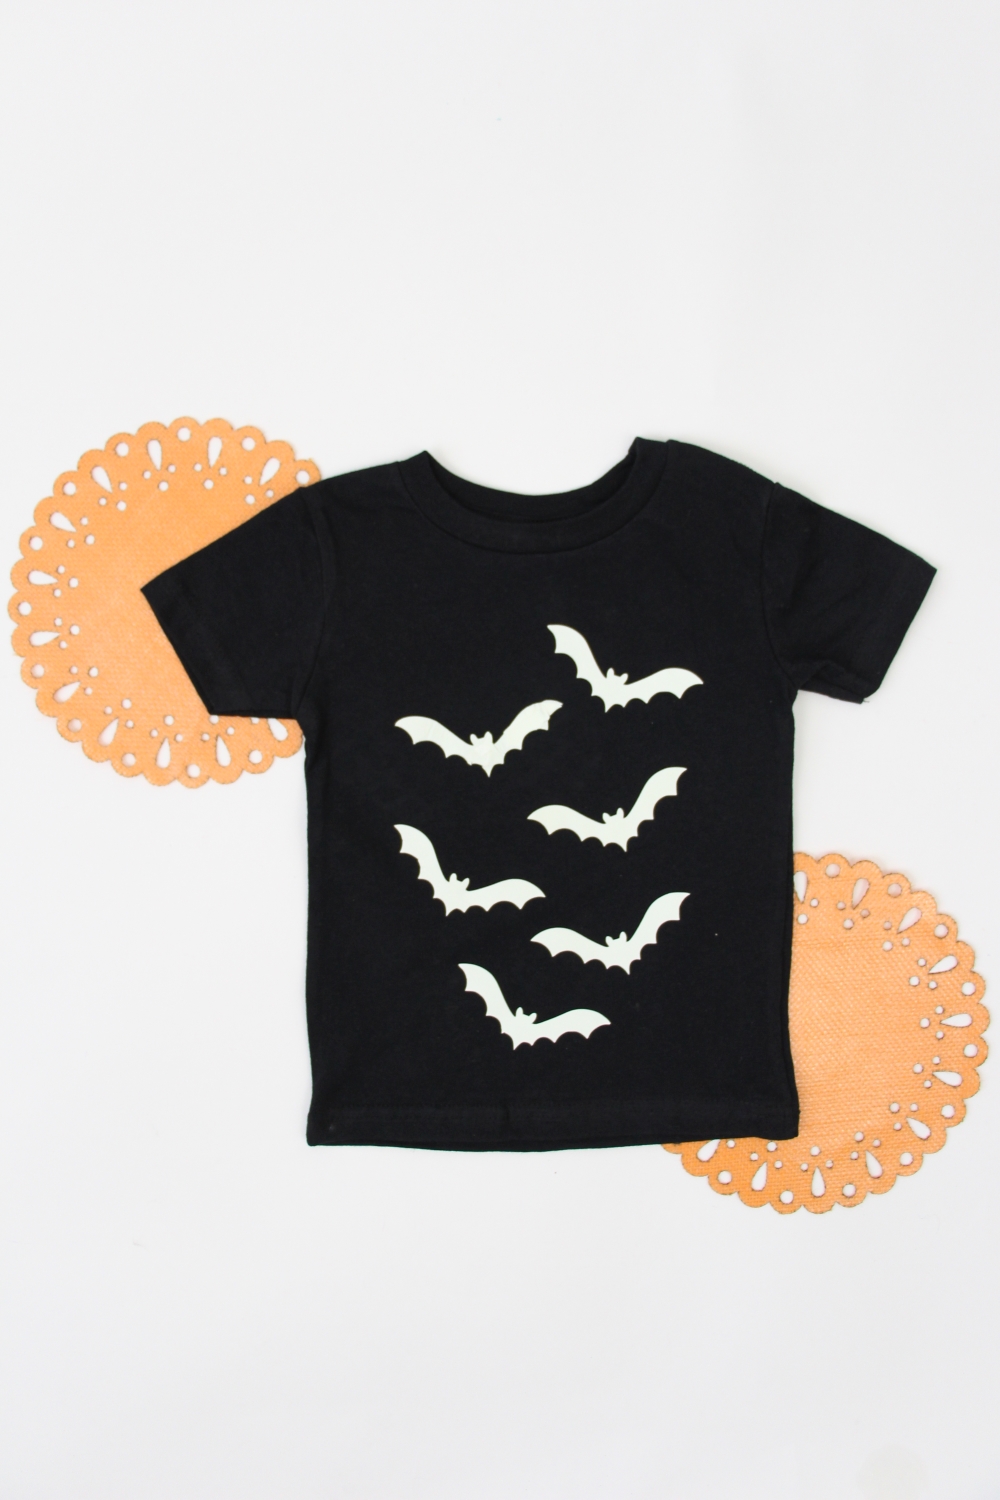 Making a Glow in the Dark Bat T-shirt for Halloween is easy with this tutorial from Polka Dotted Blue Jay and Craftables. Click here to see how to make one for yourself.